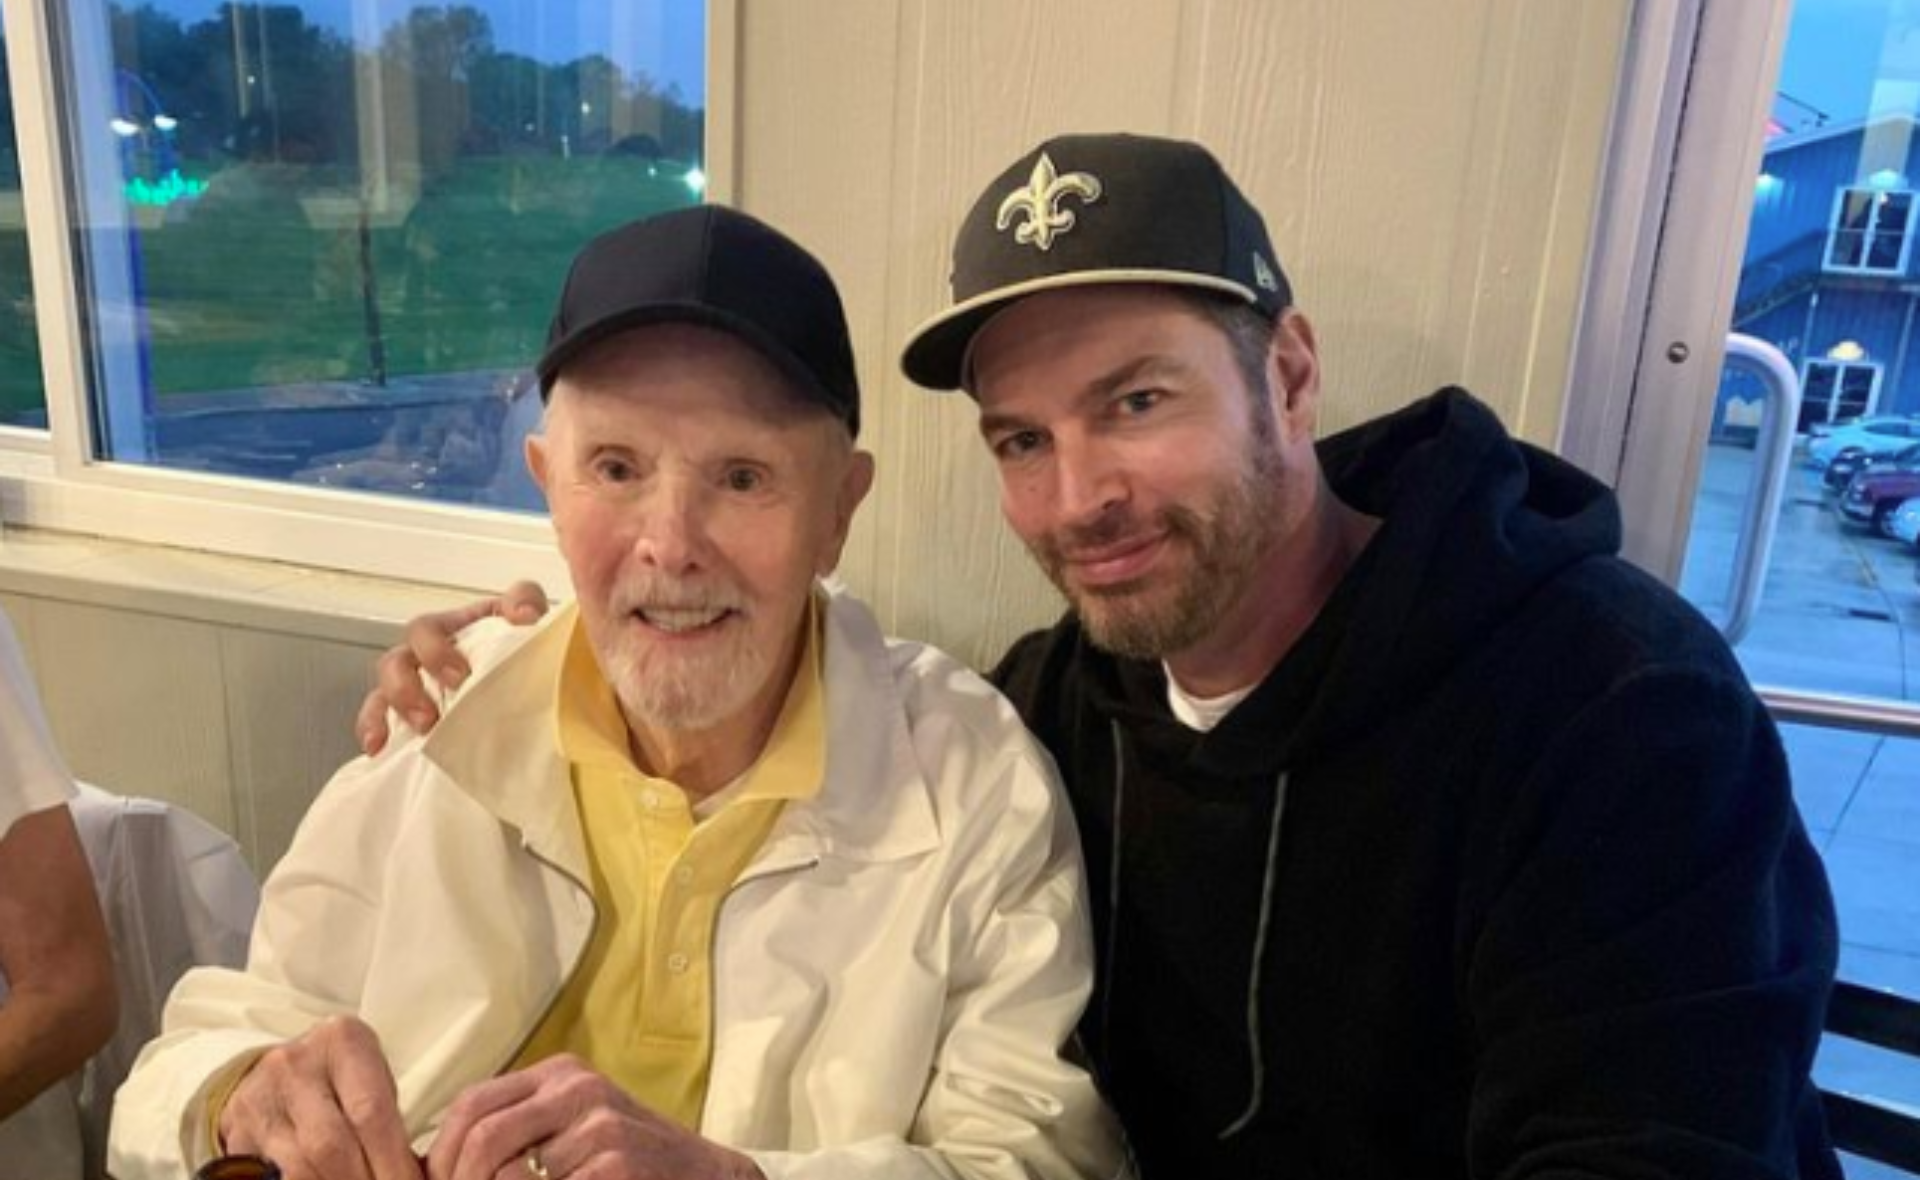 Harry Connick Jr’s father passes peacefully in New Orleans surrounded by loved ones